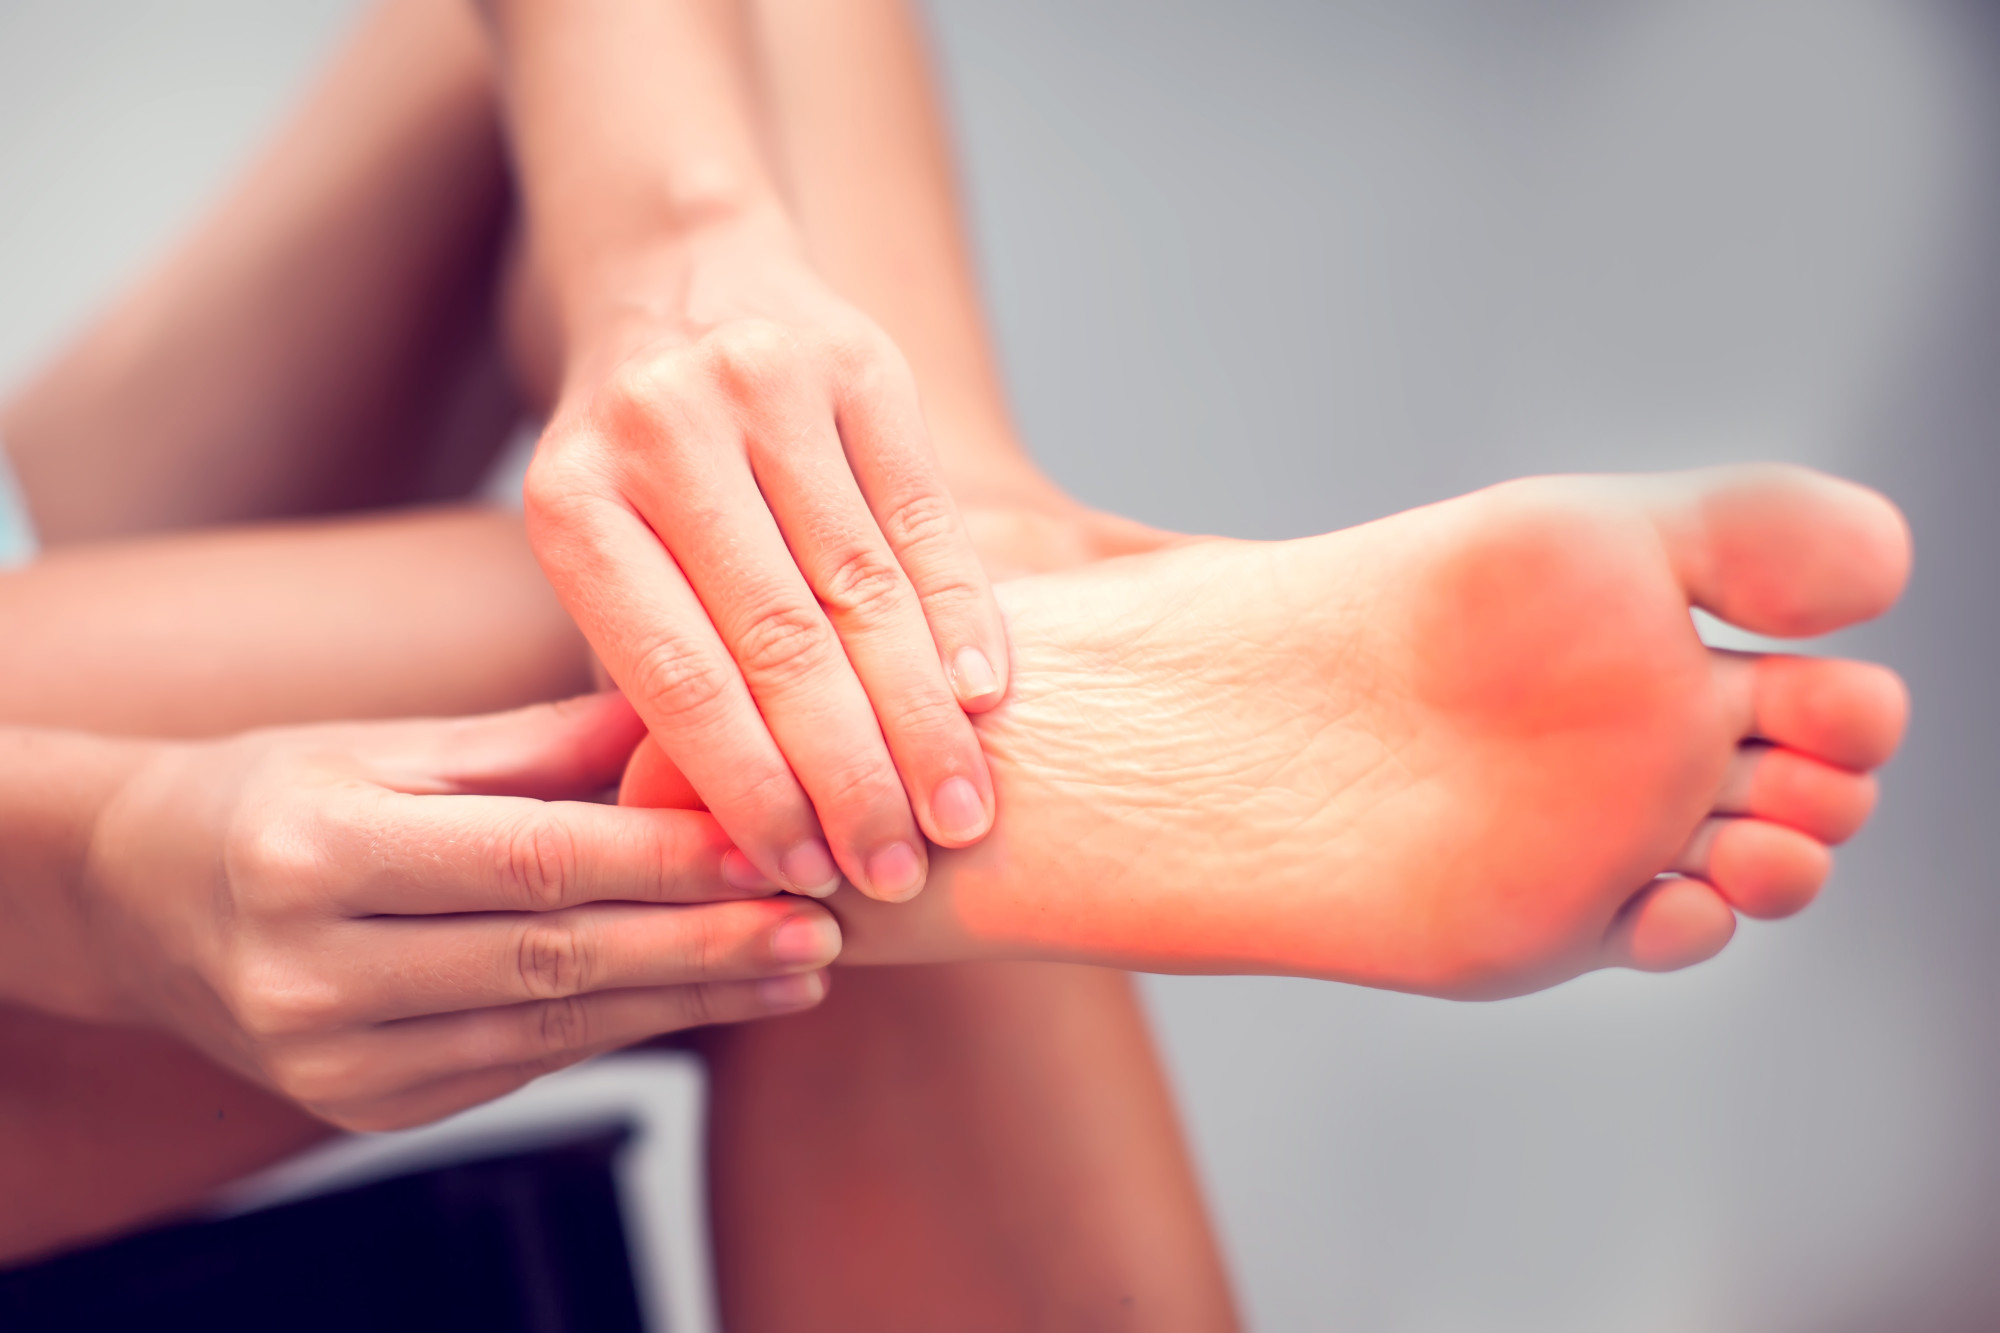 Beauty Tip #35 — Massage with petroleum jelly to soften cracked heels |  TheHealthSite.com